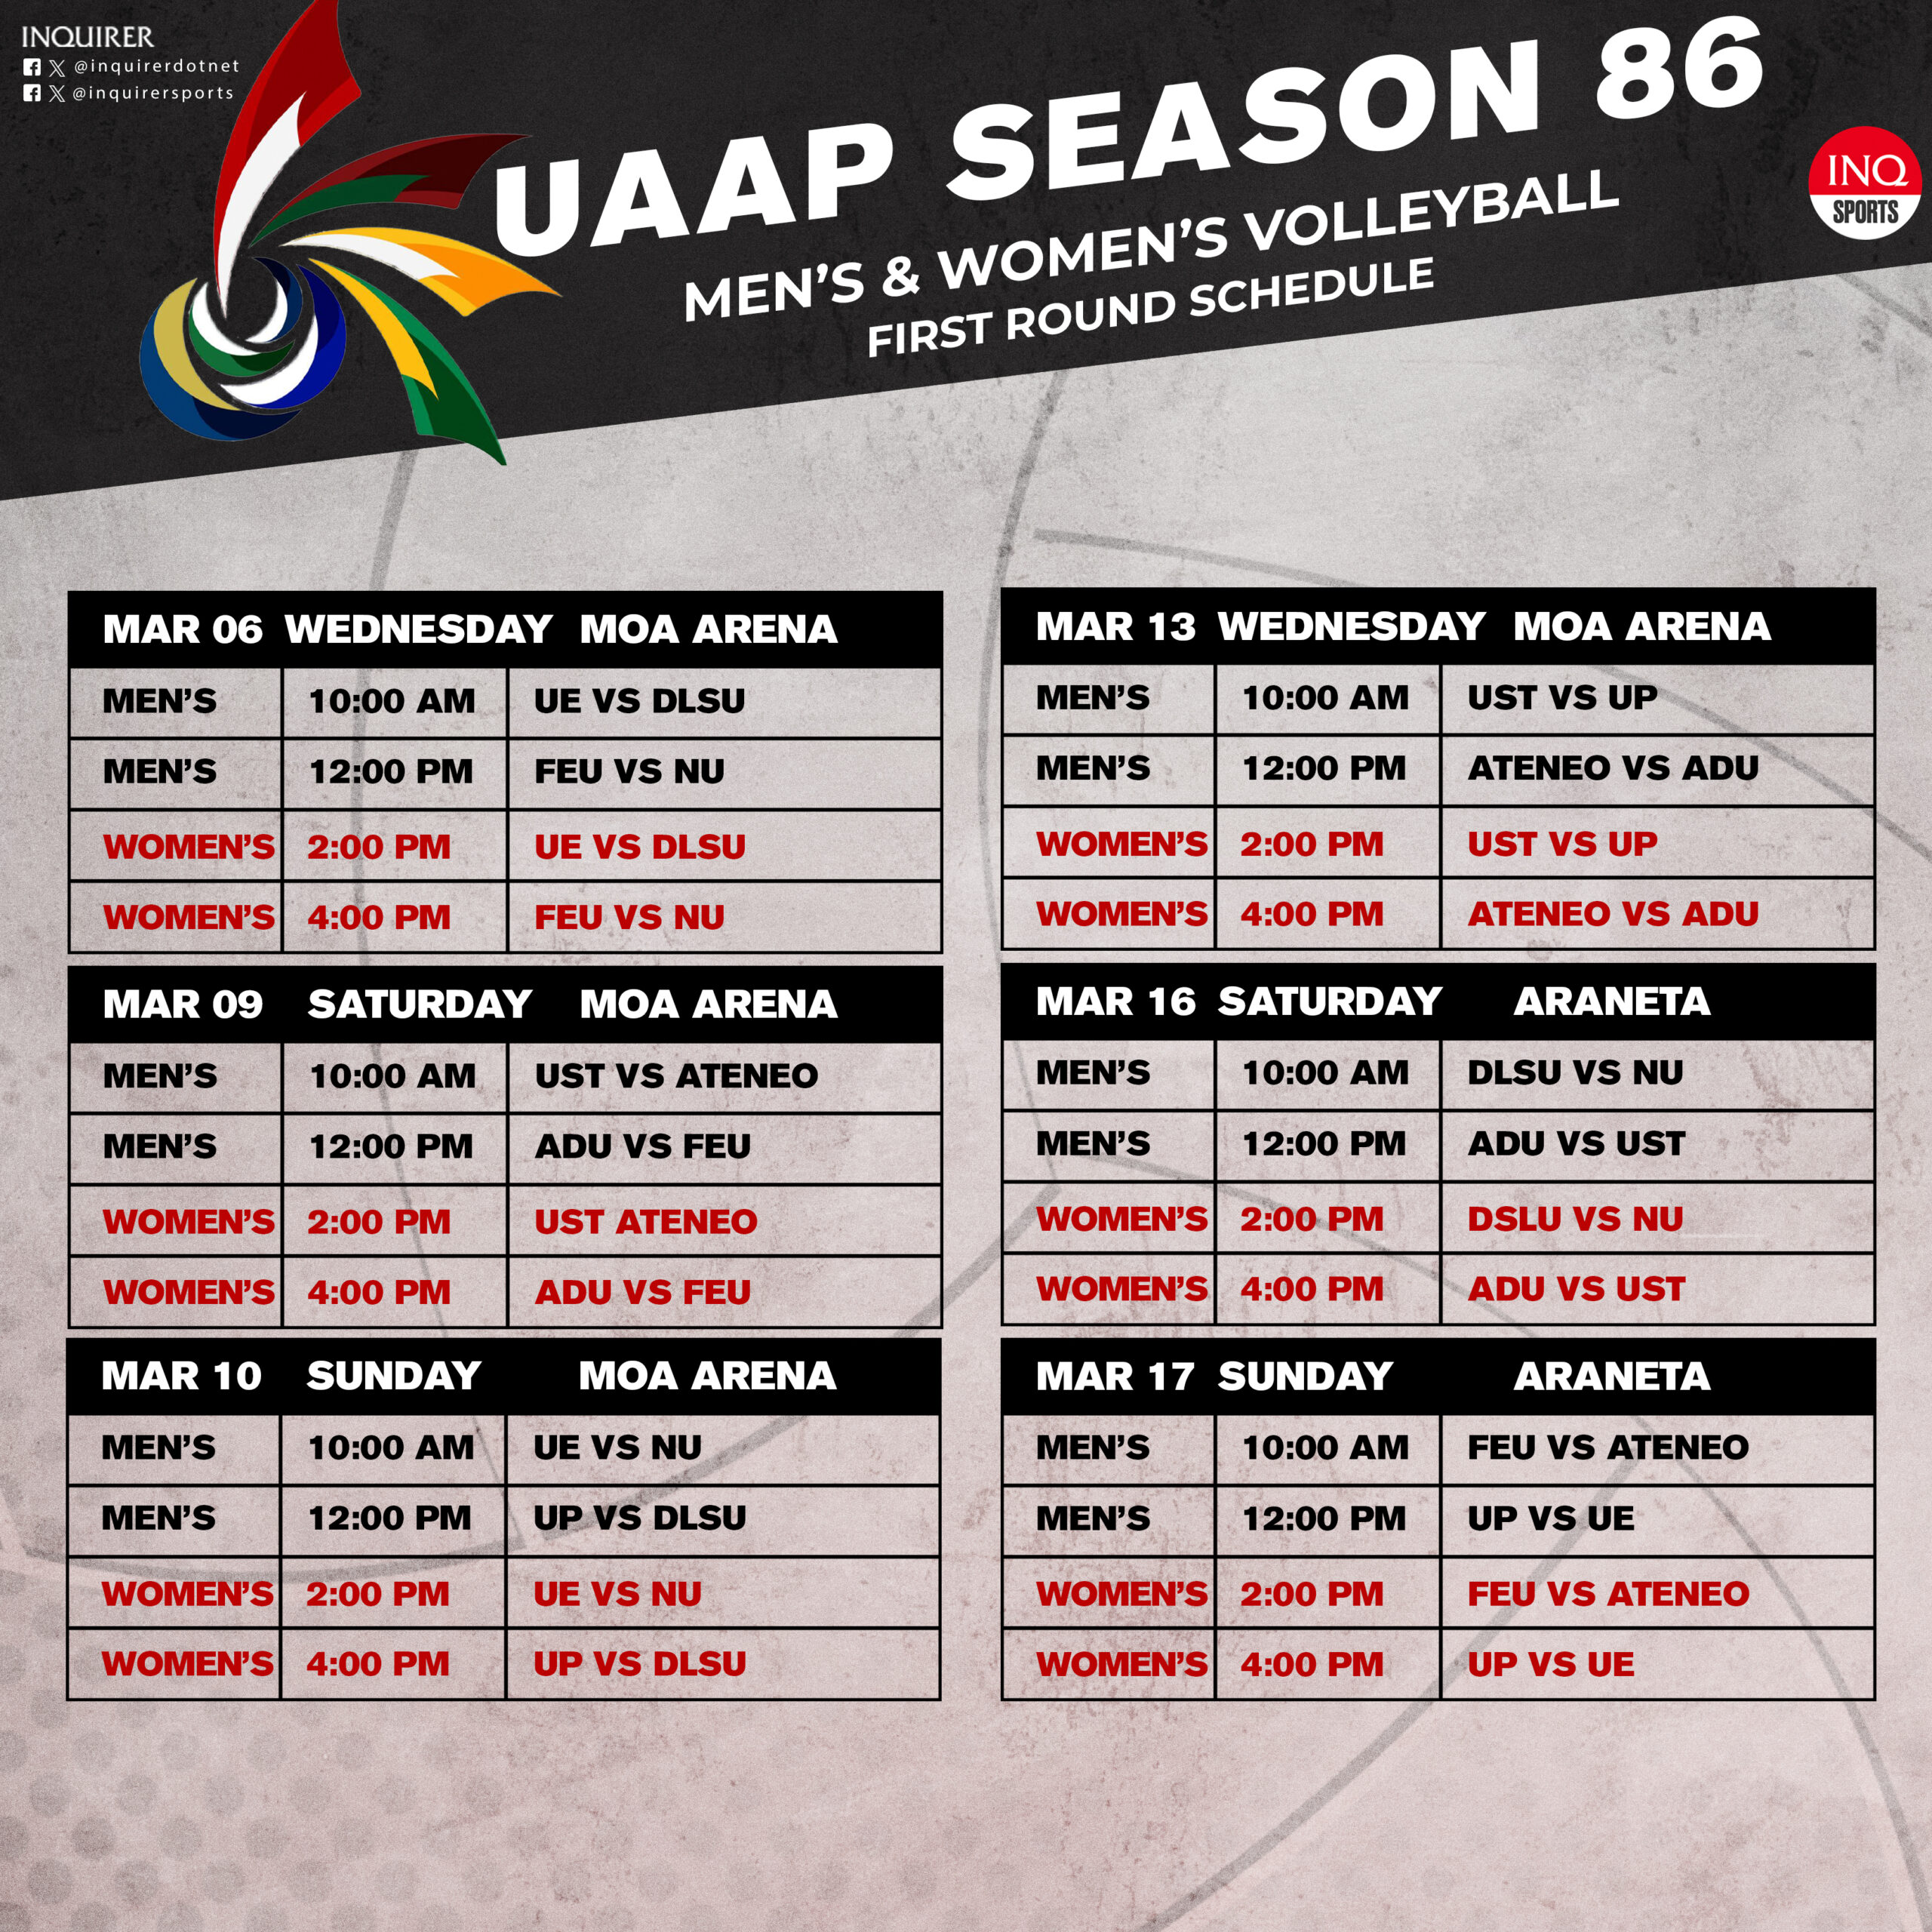 UAAP Season 86 men's and women's volleyball first-round schedule